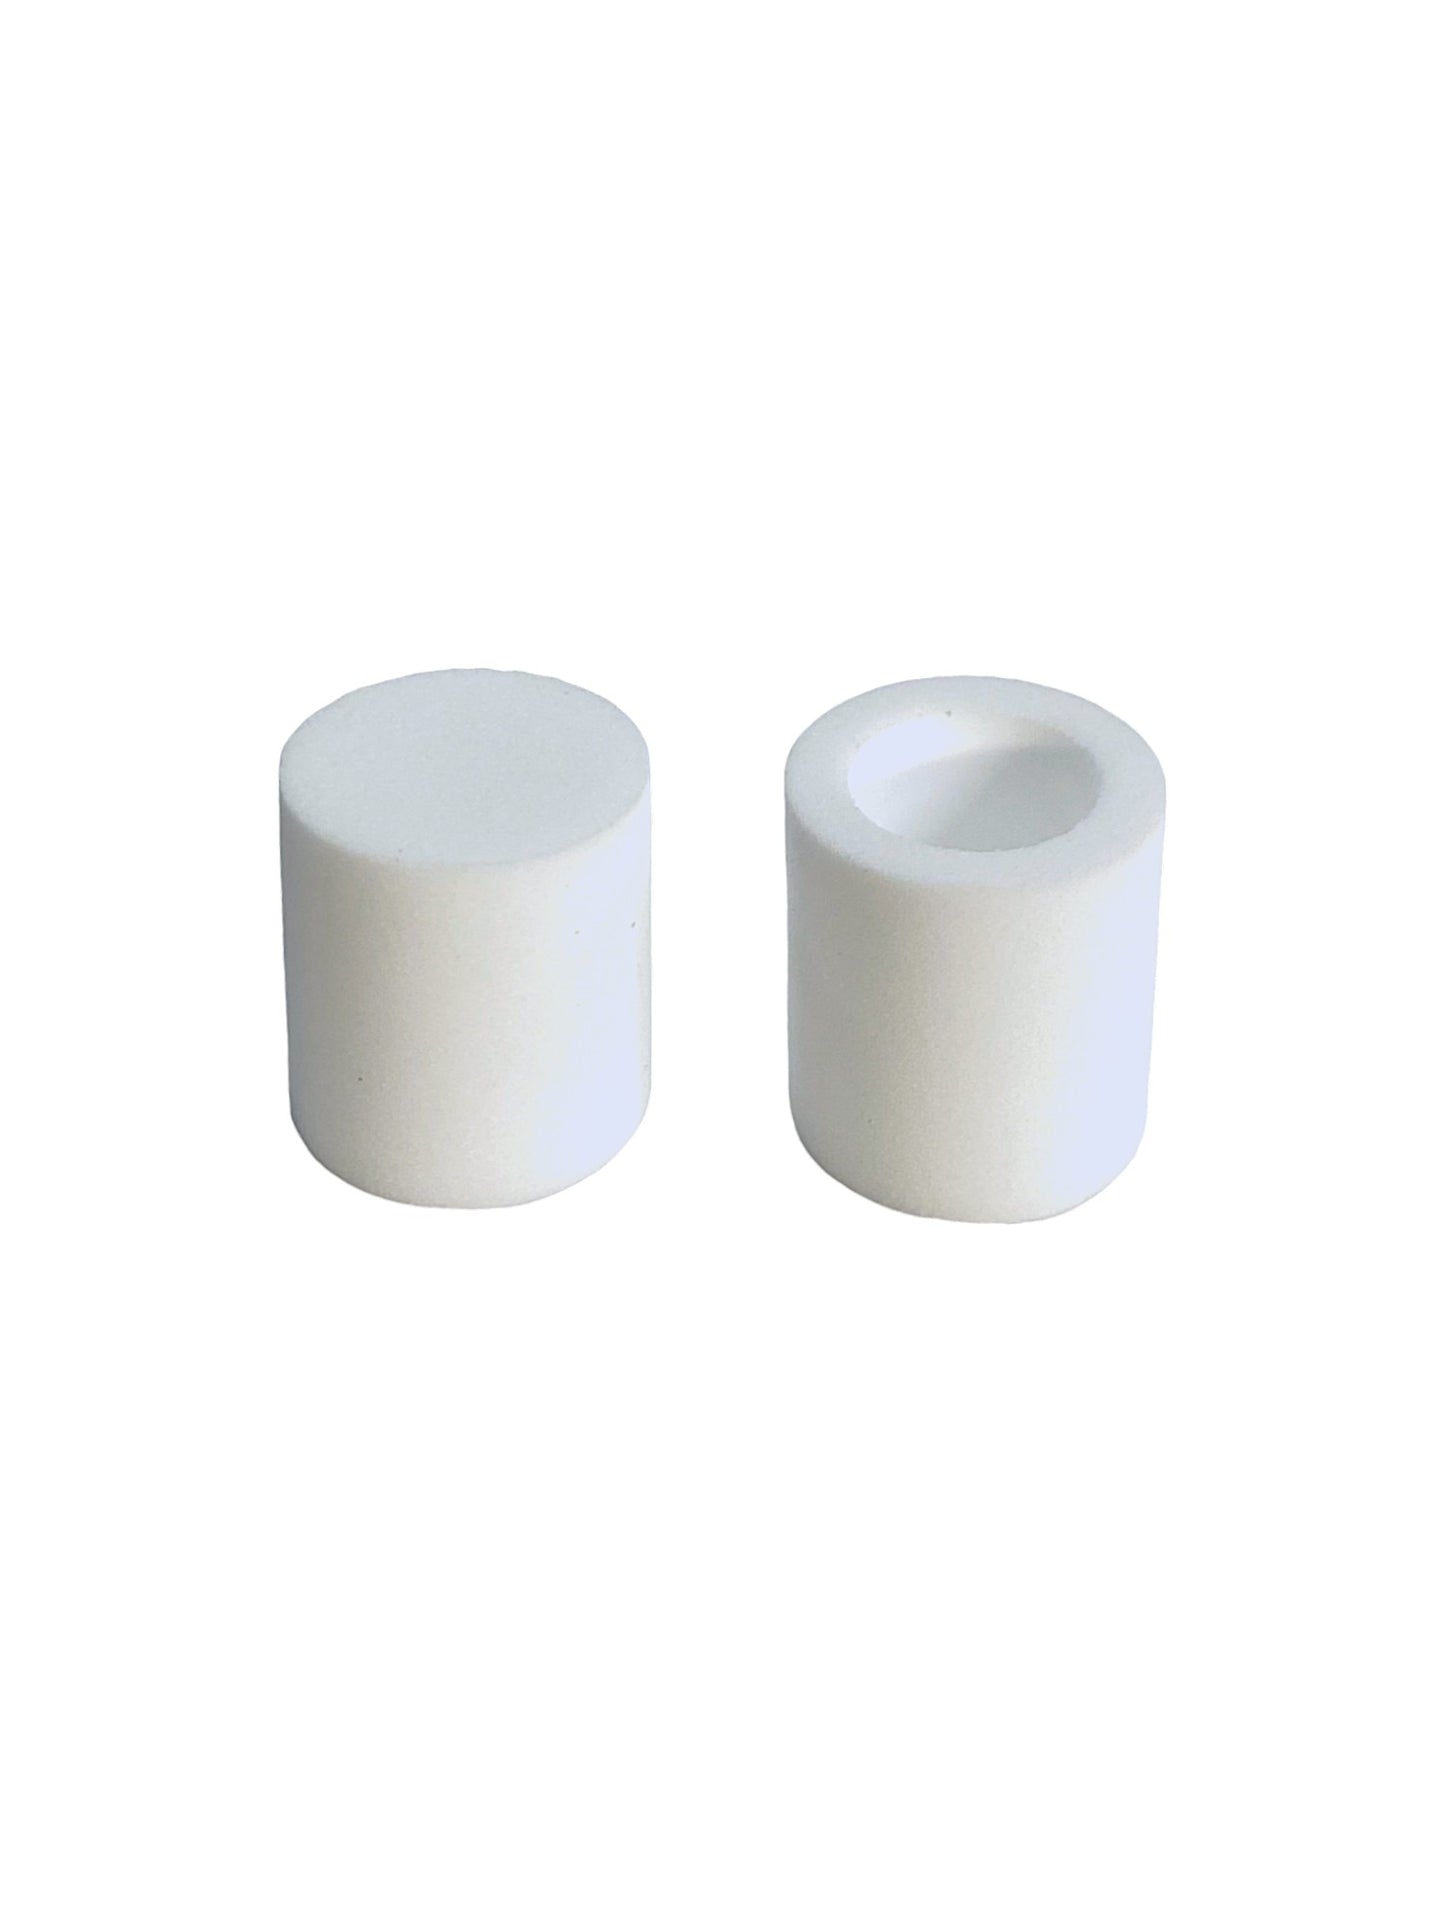 ZRDR CO2 Canister Replacement Filter Elements (Pair) Part # ZRDR-CO2-FILELM